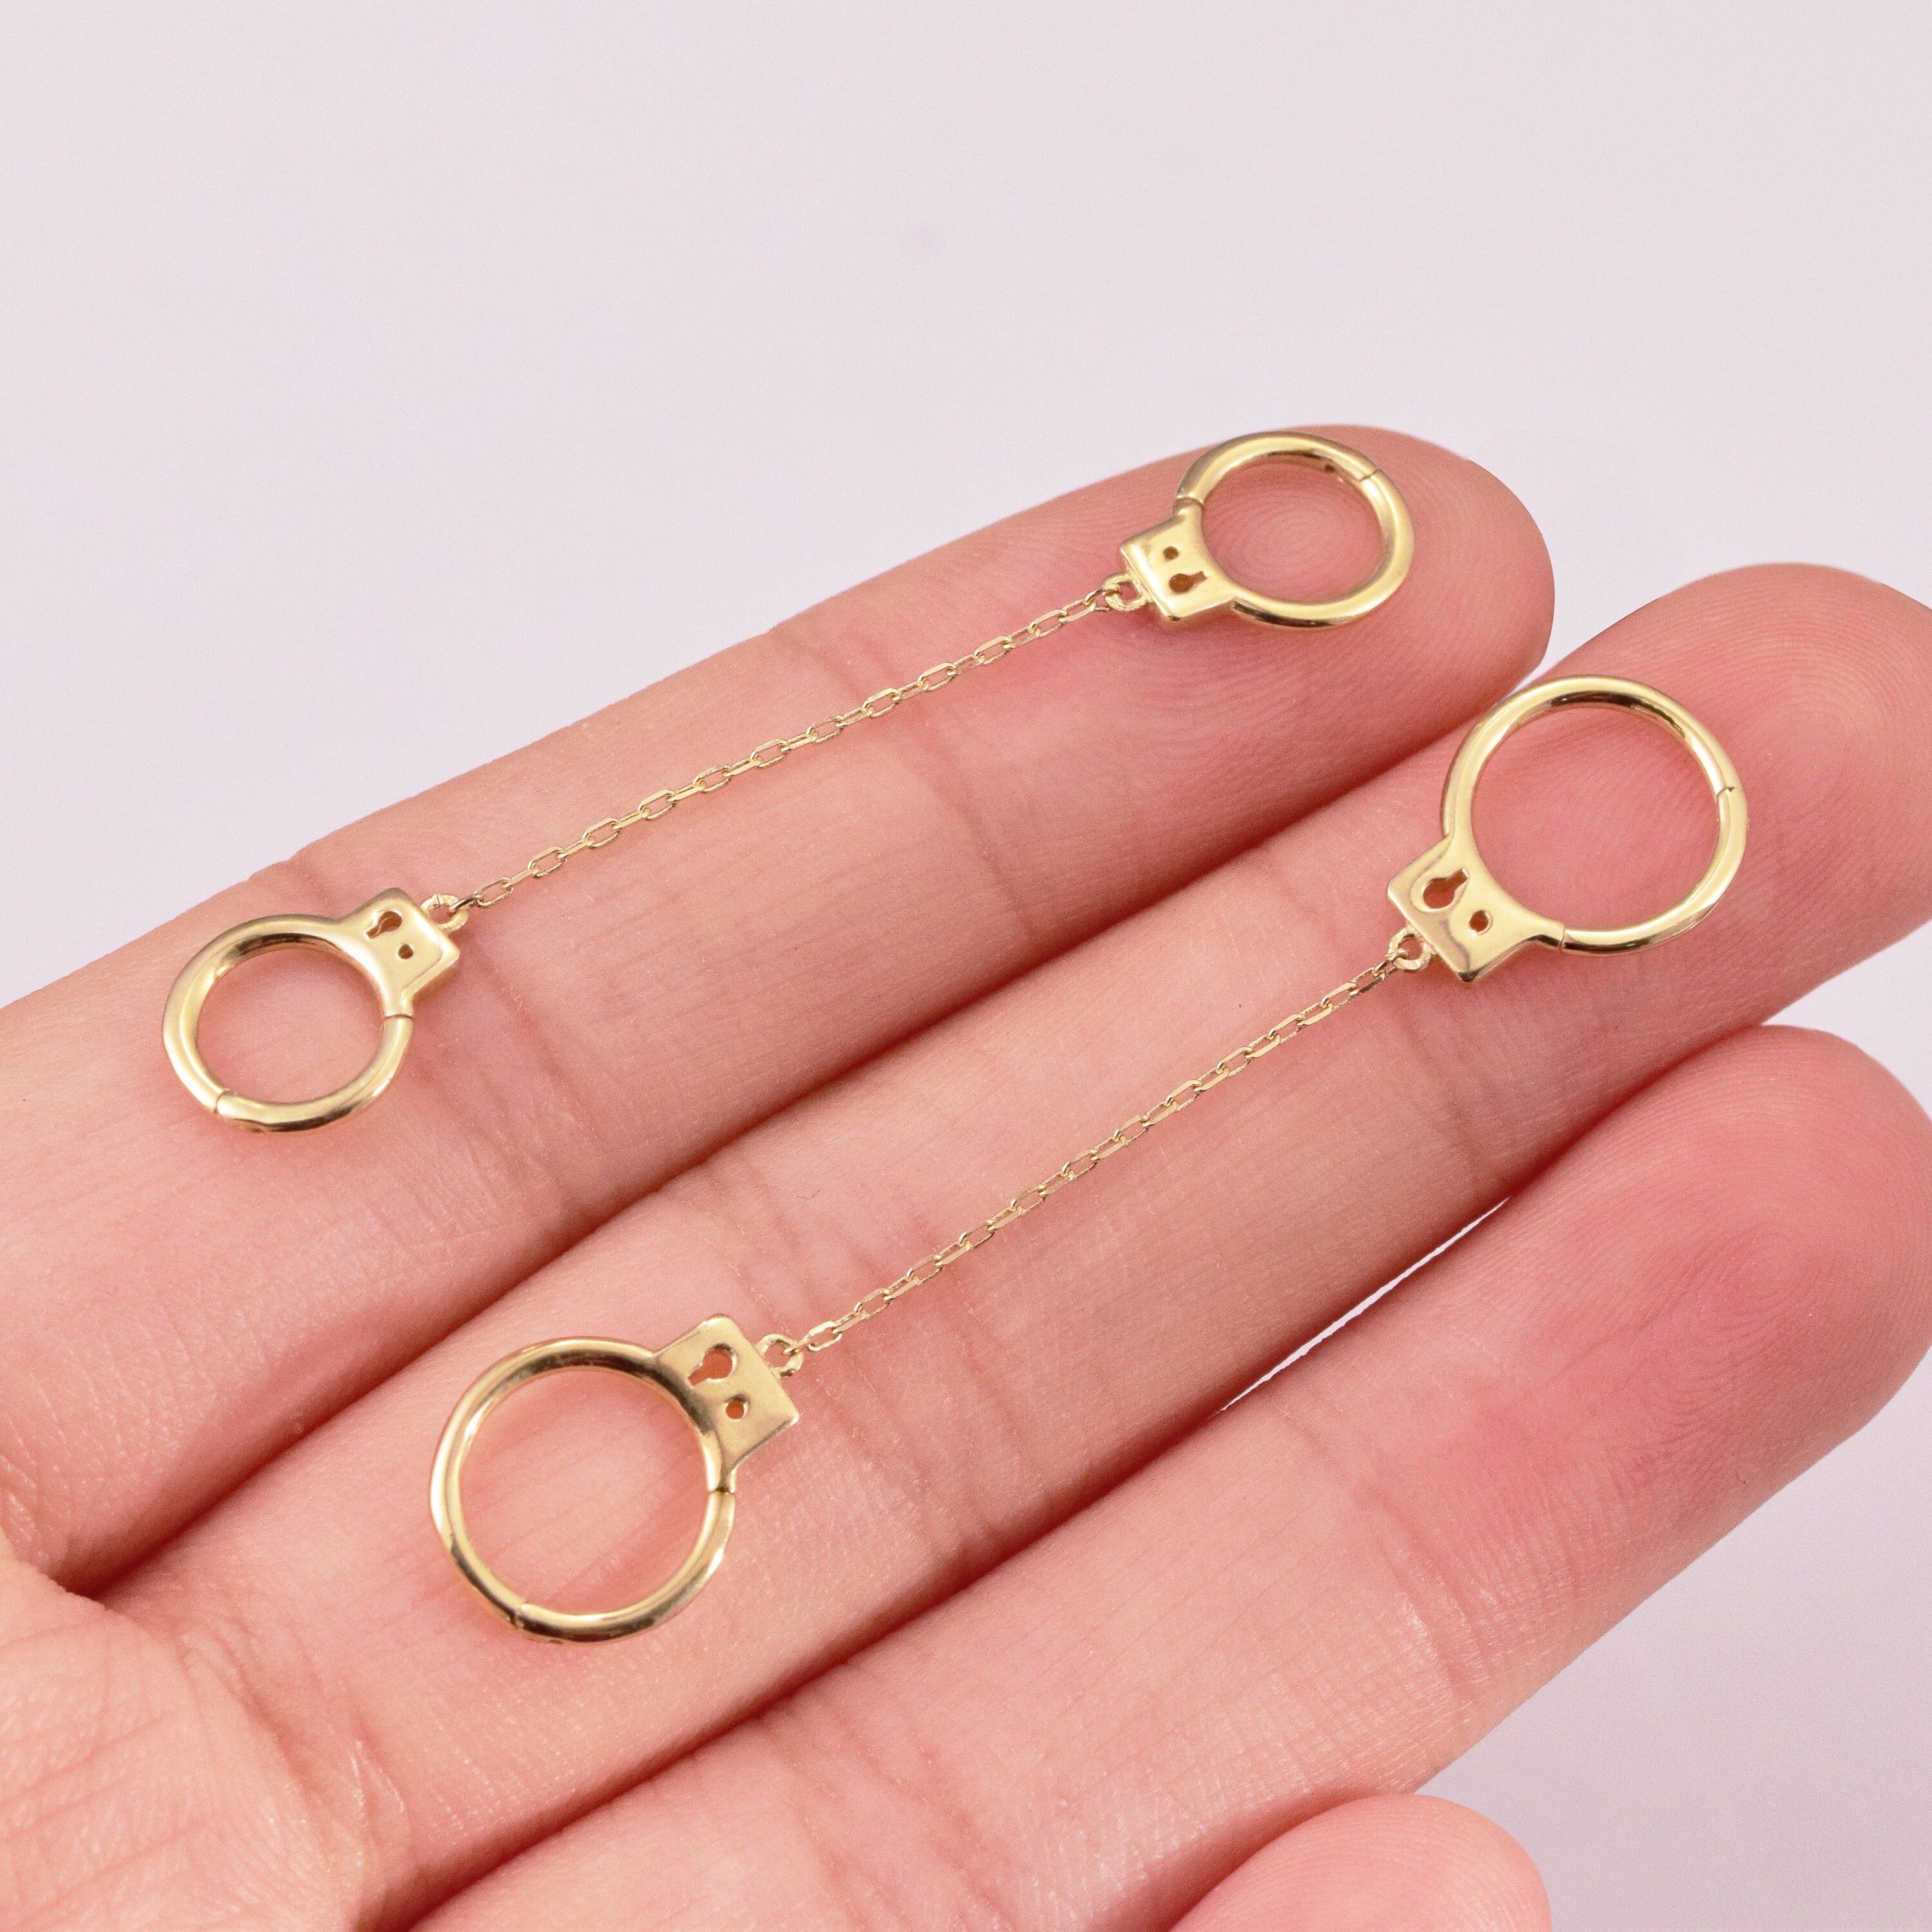 Two Earring Back Replacements, Threaded 14K Solid Yellow Gold, .0375 –  Everyday Elegance Jewelry